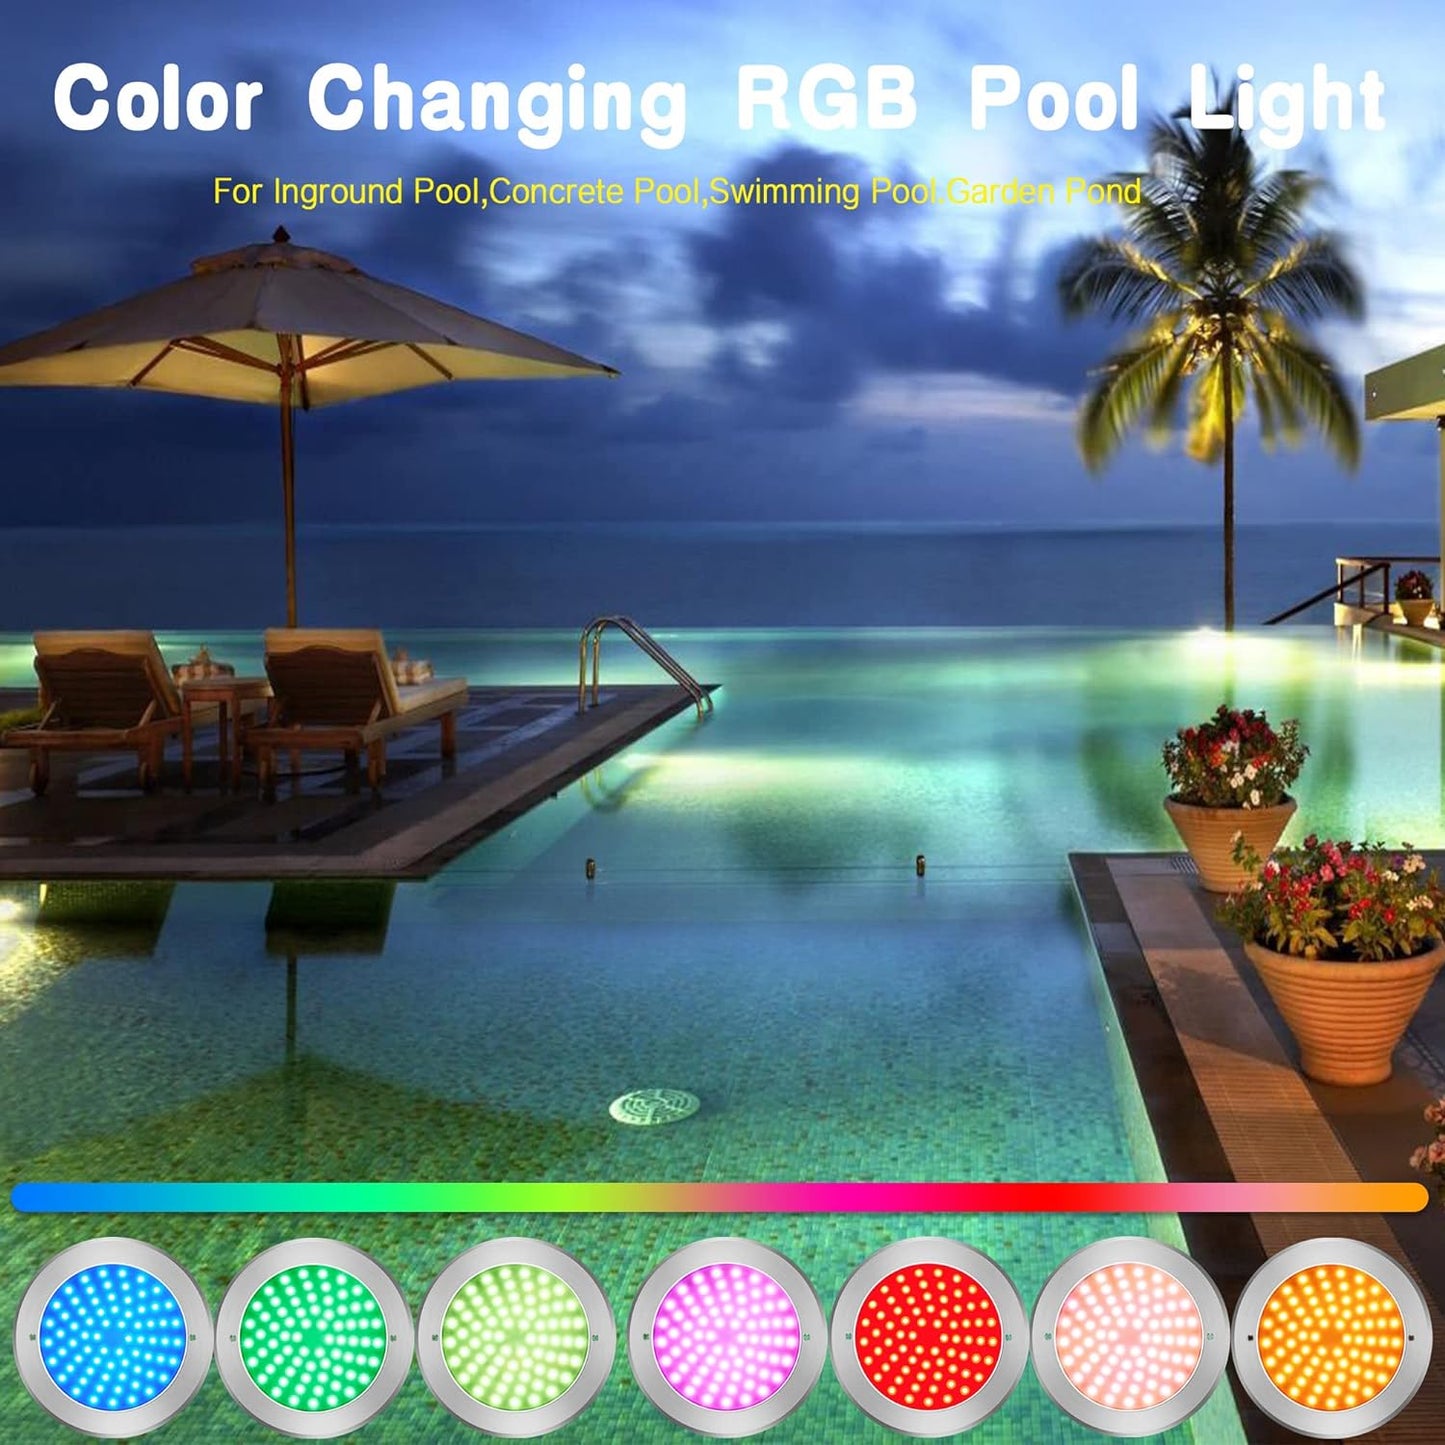 LED Pool Light with Control Kit,54 Watts LED Inground Pool Light Fixture Waterproof,Wireless Pool Light System,50Ft Cord Pool Light Fixture with Remote(Control included,Voltage Converter Includ